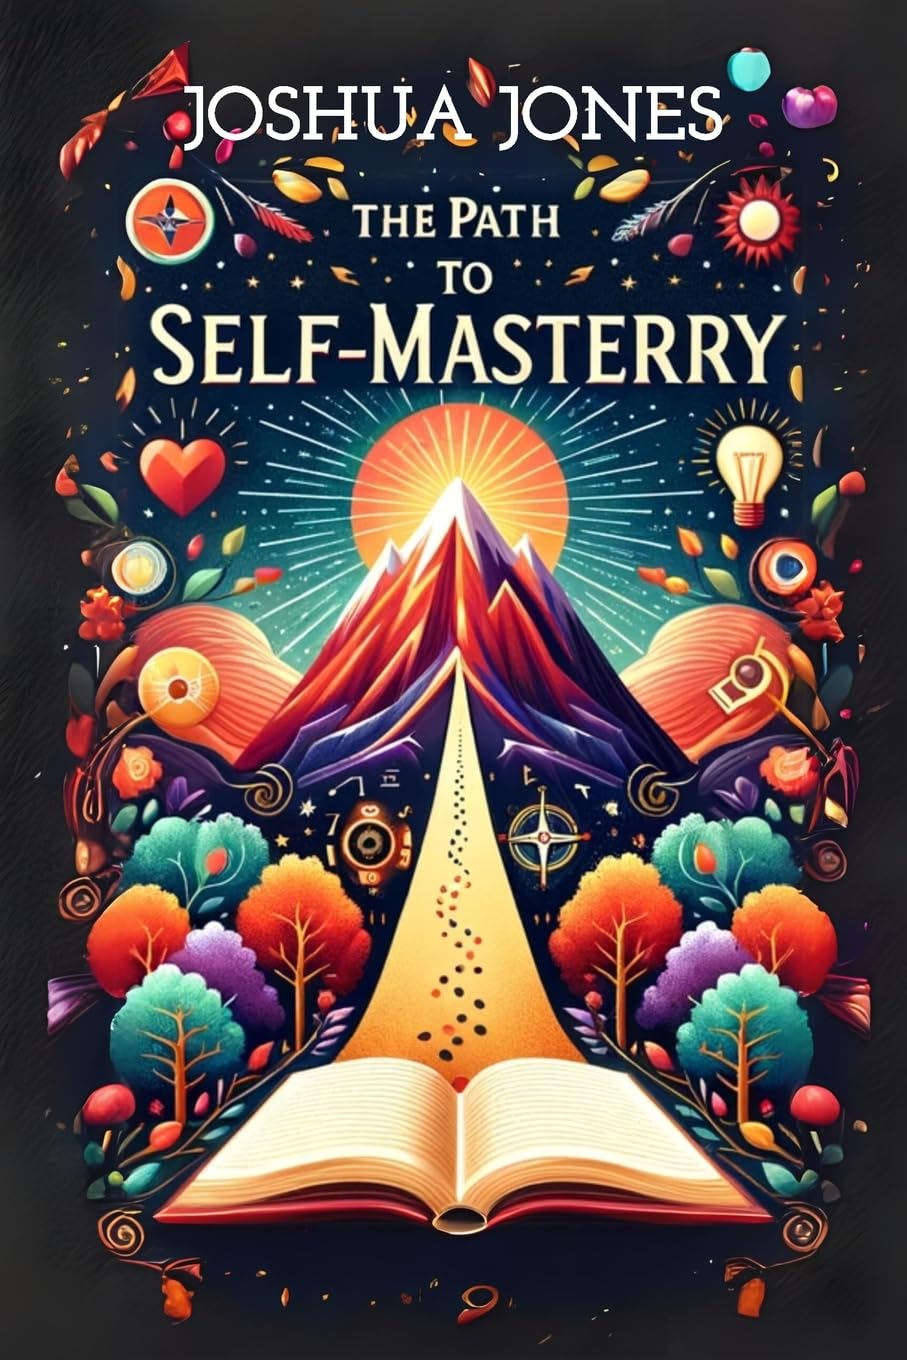 The Path to Self-Mastery